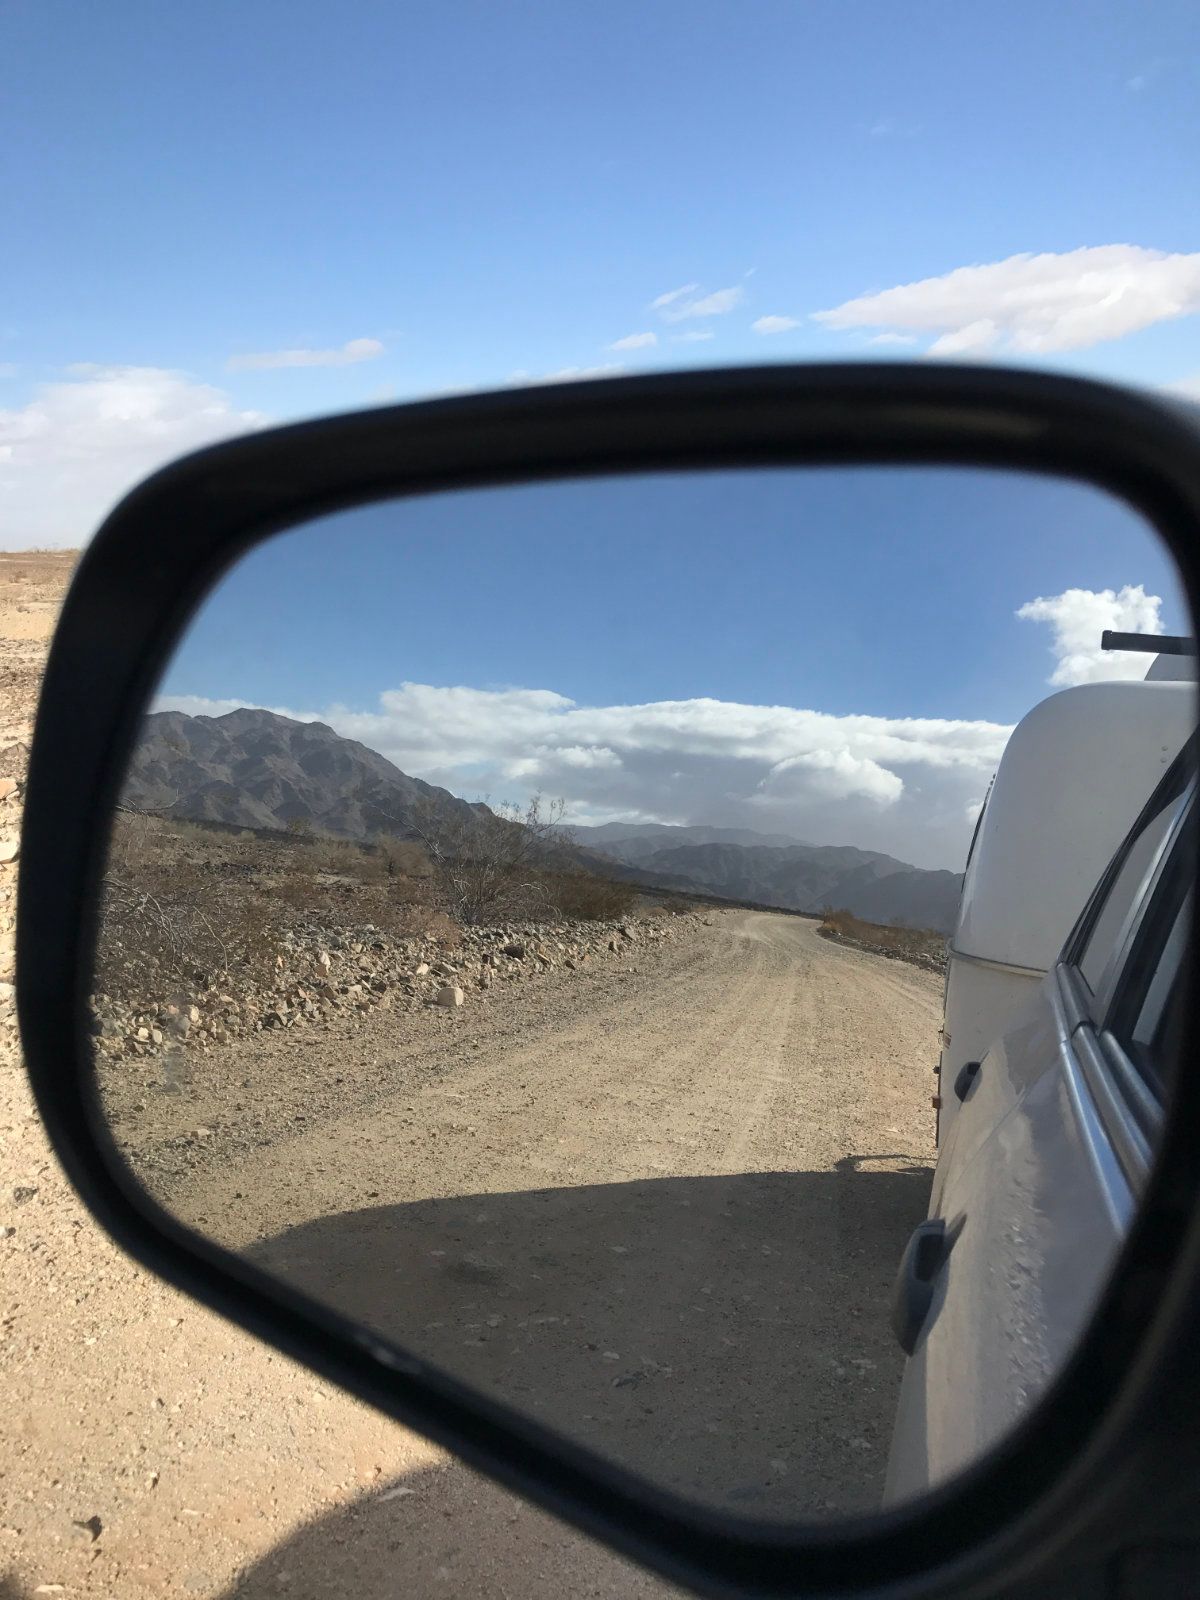 slow long drive down washboarded road in the desert (2017)